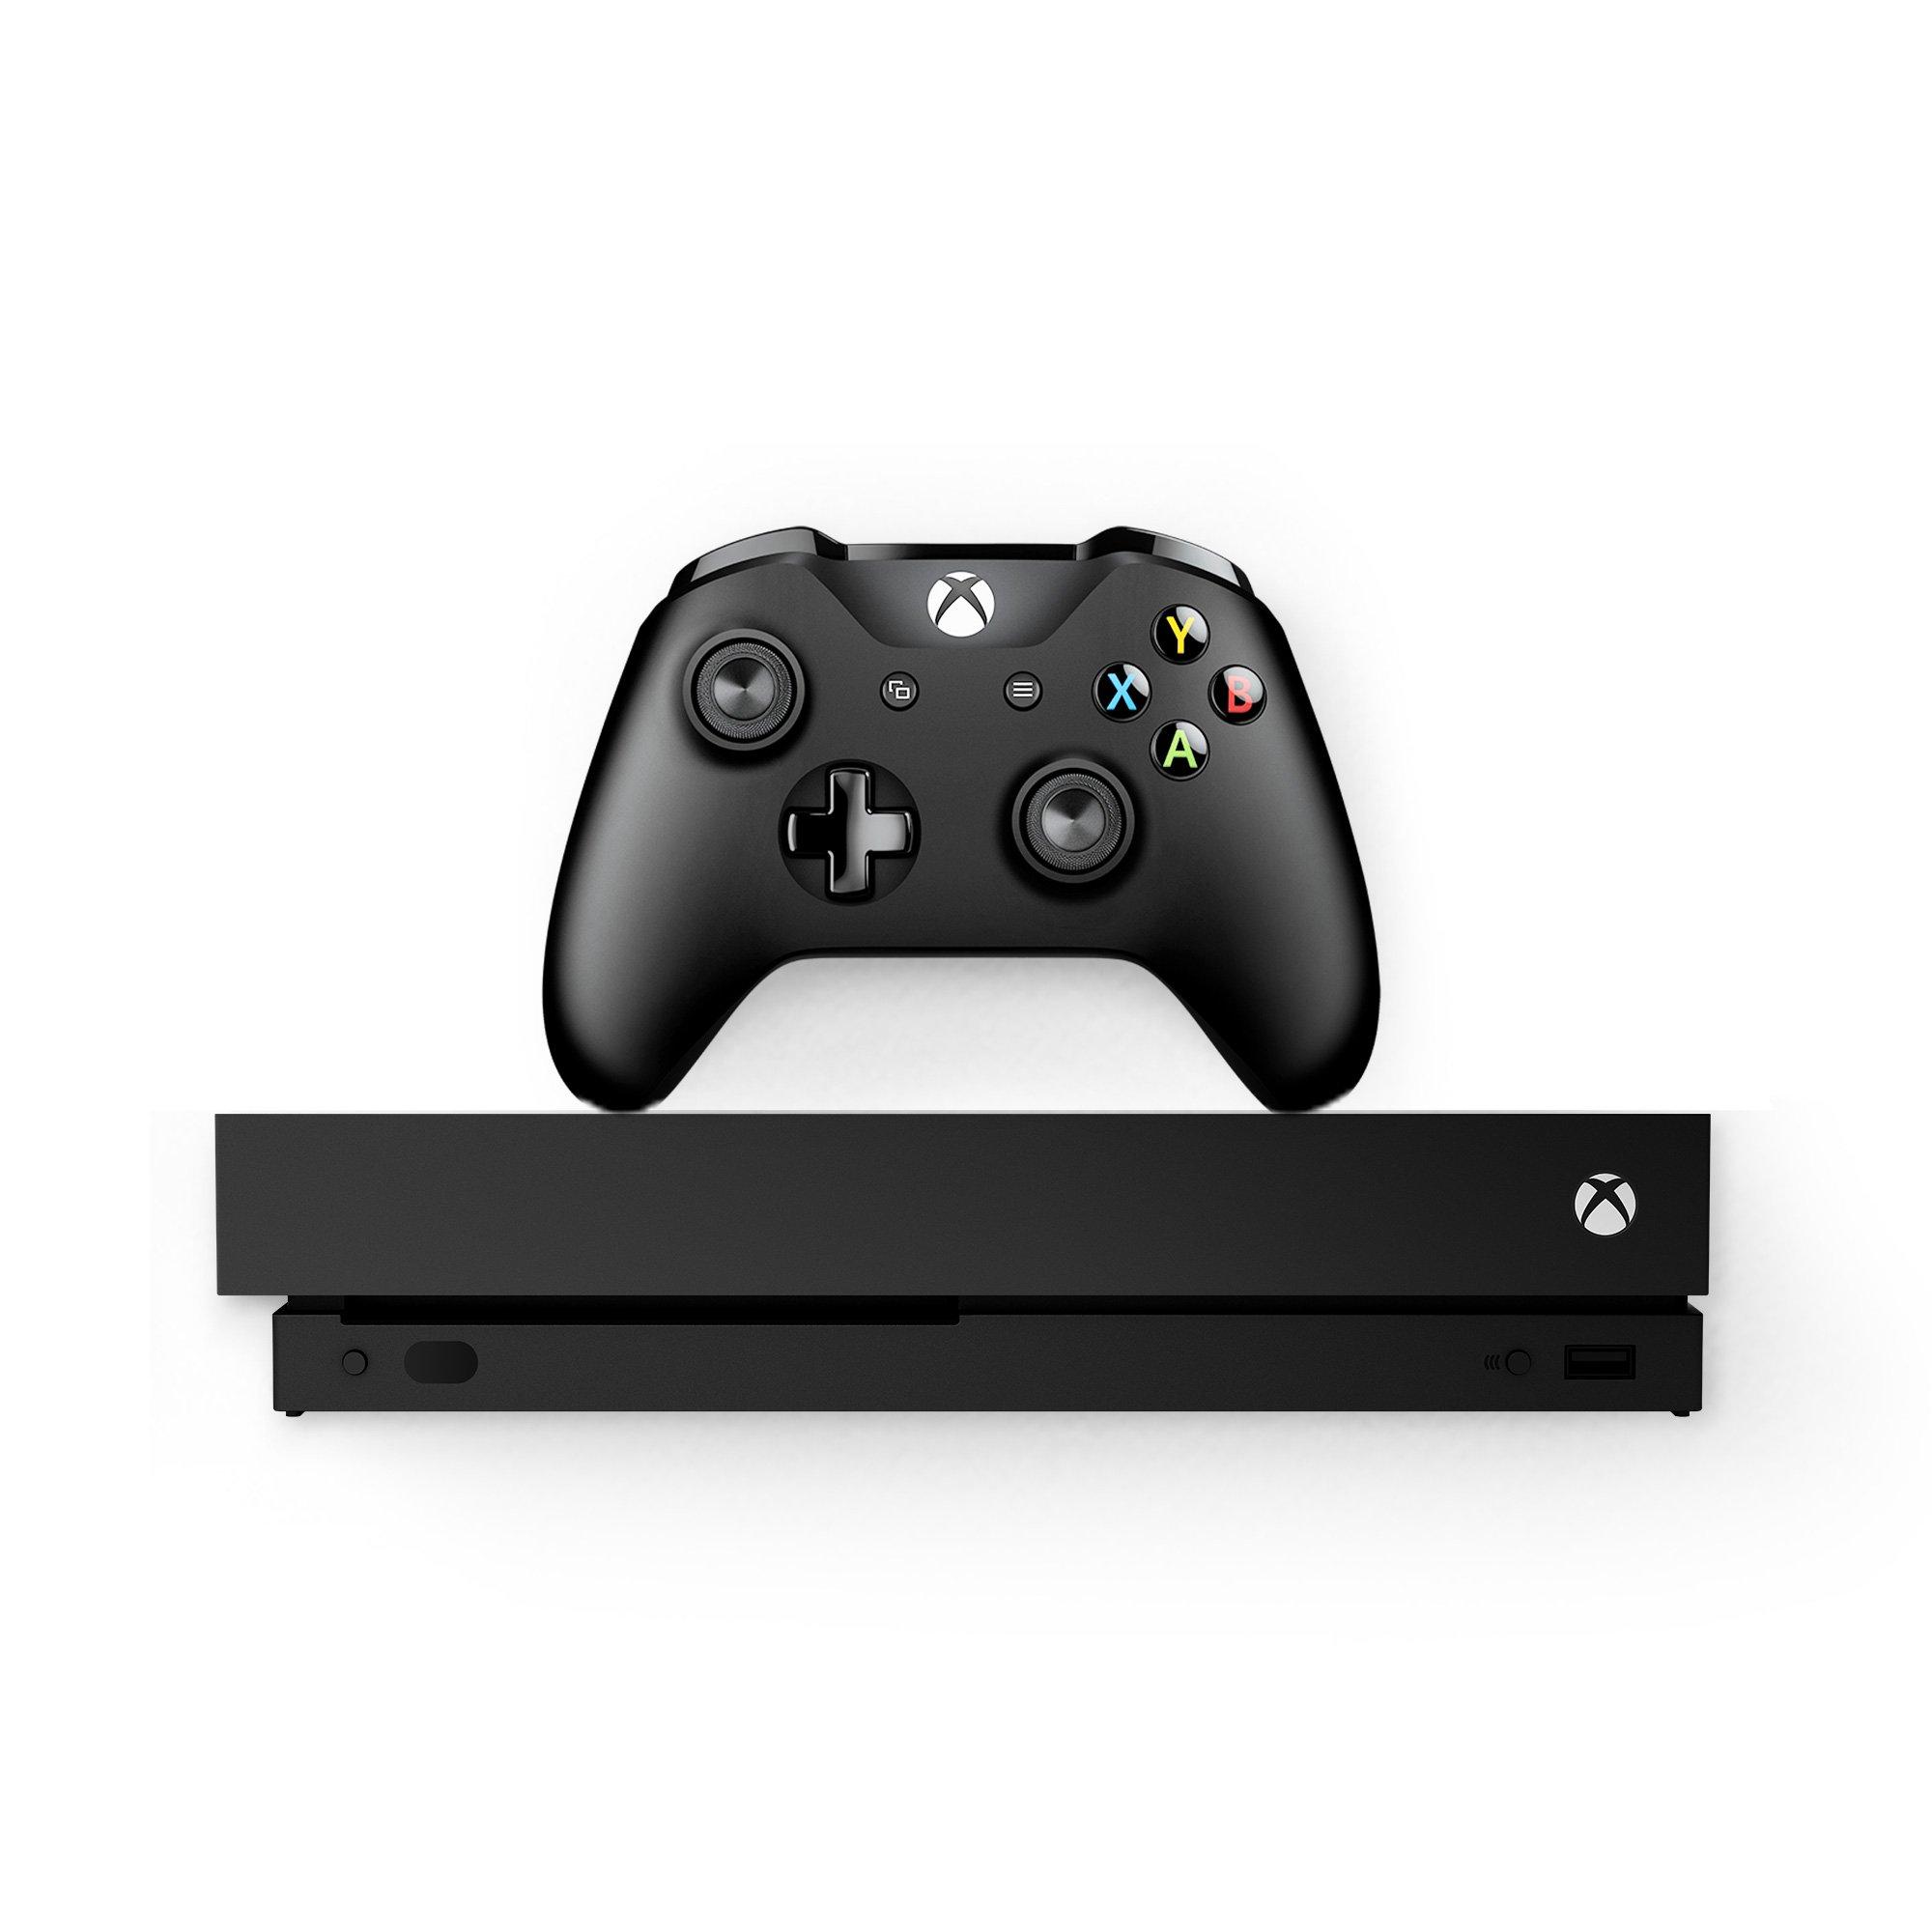 Best gaming console deal: Grab the Microsoft Xbox Series X console for  under $350 at Best Buy